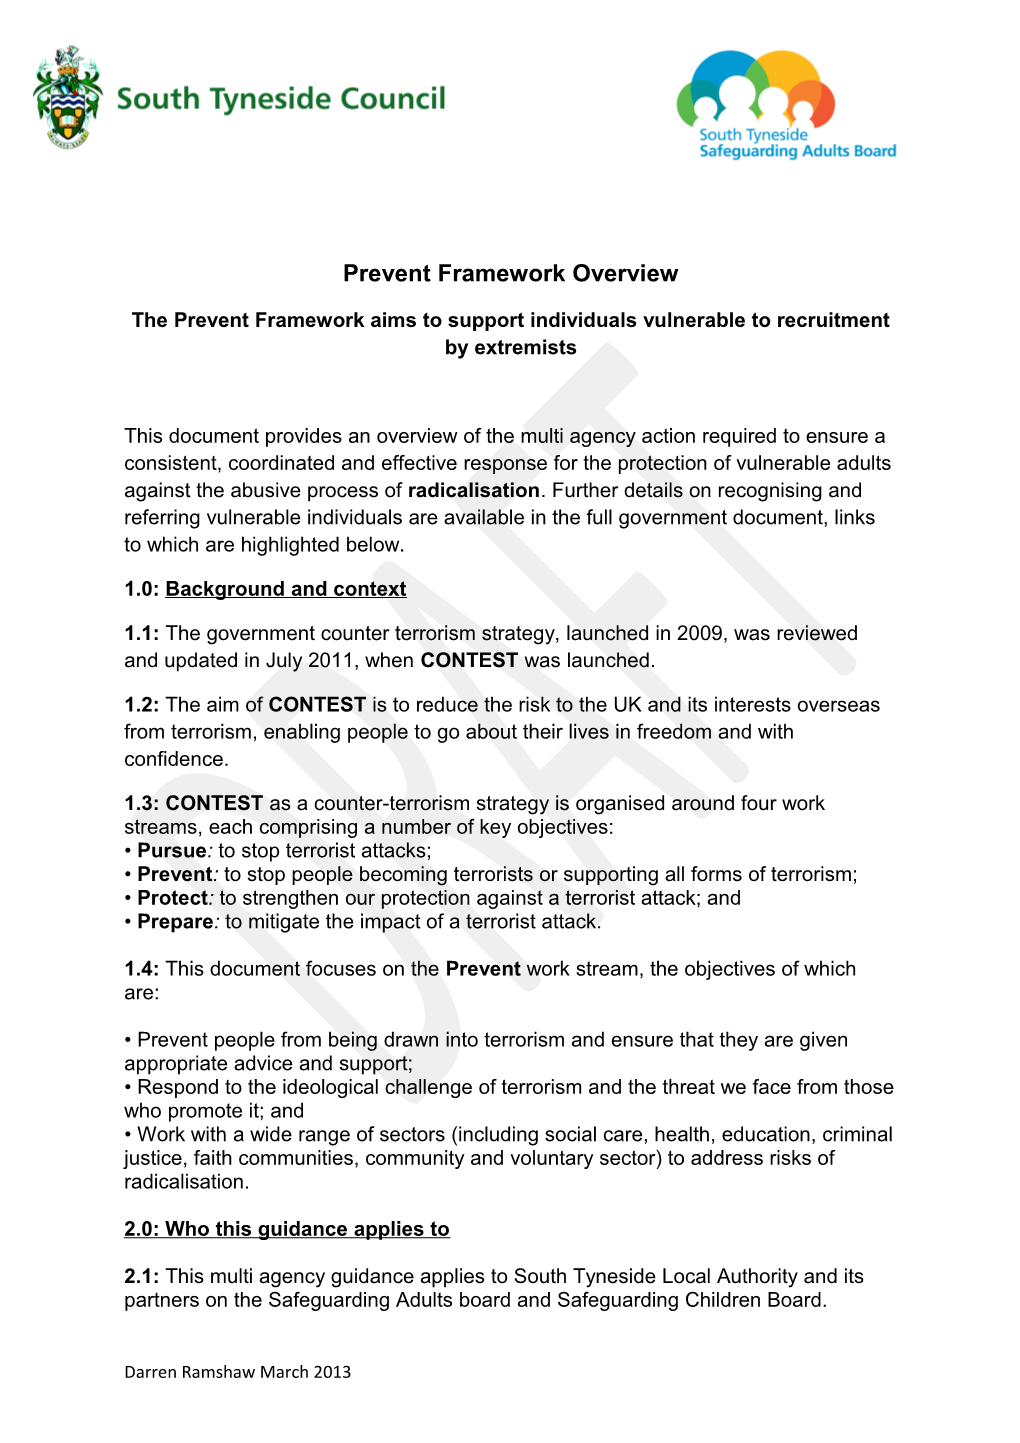 The Prevent Framework Aims to Support Individuals Vulnerable to Recruitment by Extremists